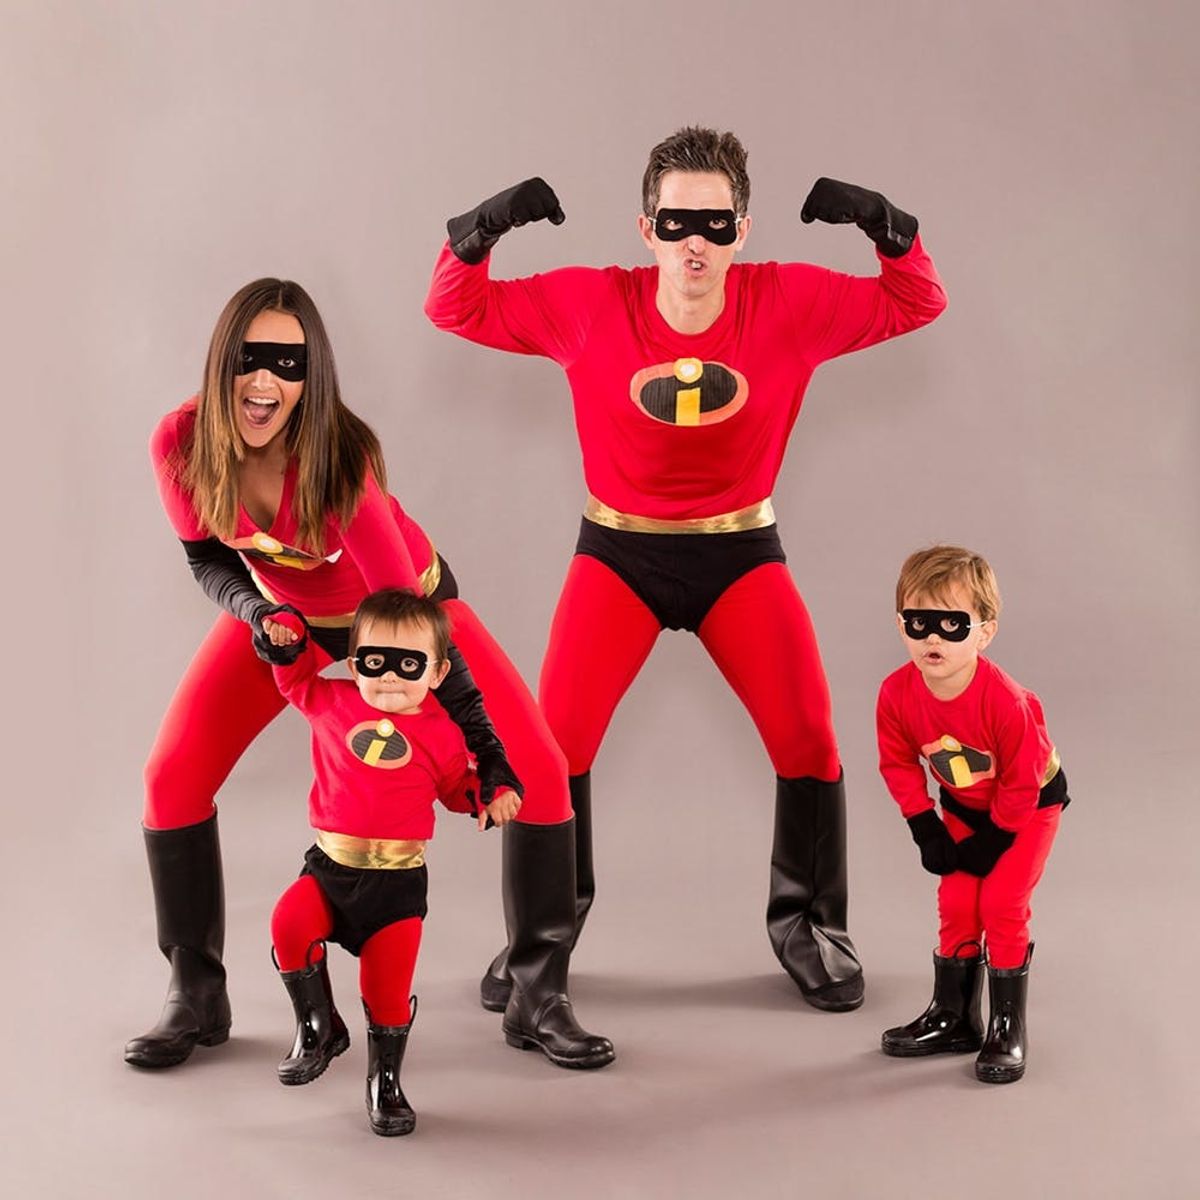 Halloween Costume Ideas the Whole Family Will Love